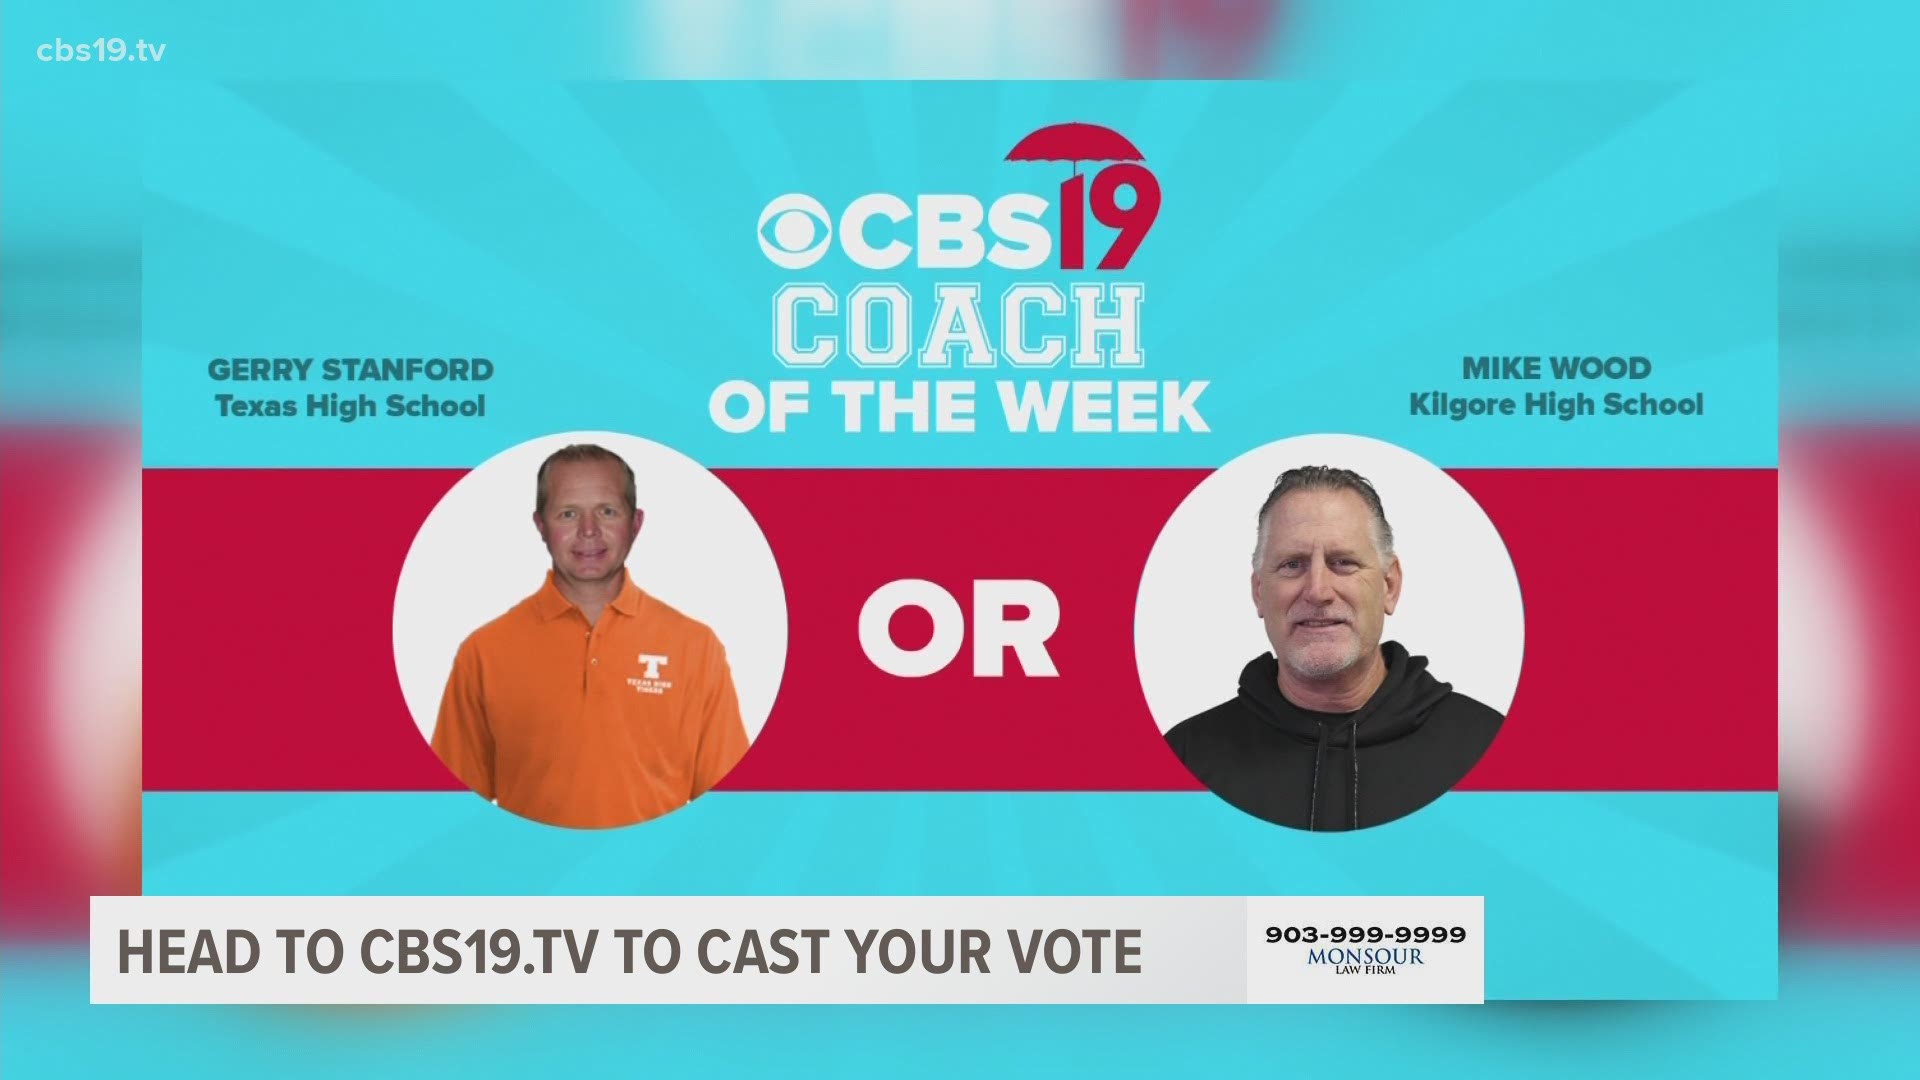 Vote now through Wednesday, Nov. 11, at 11:59 p.m. The winner will be announced Thursday, Nov. 12, on CBS19 News at 6 p.m.!